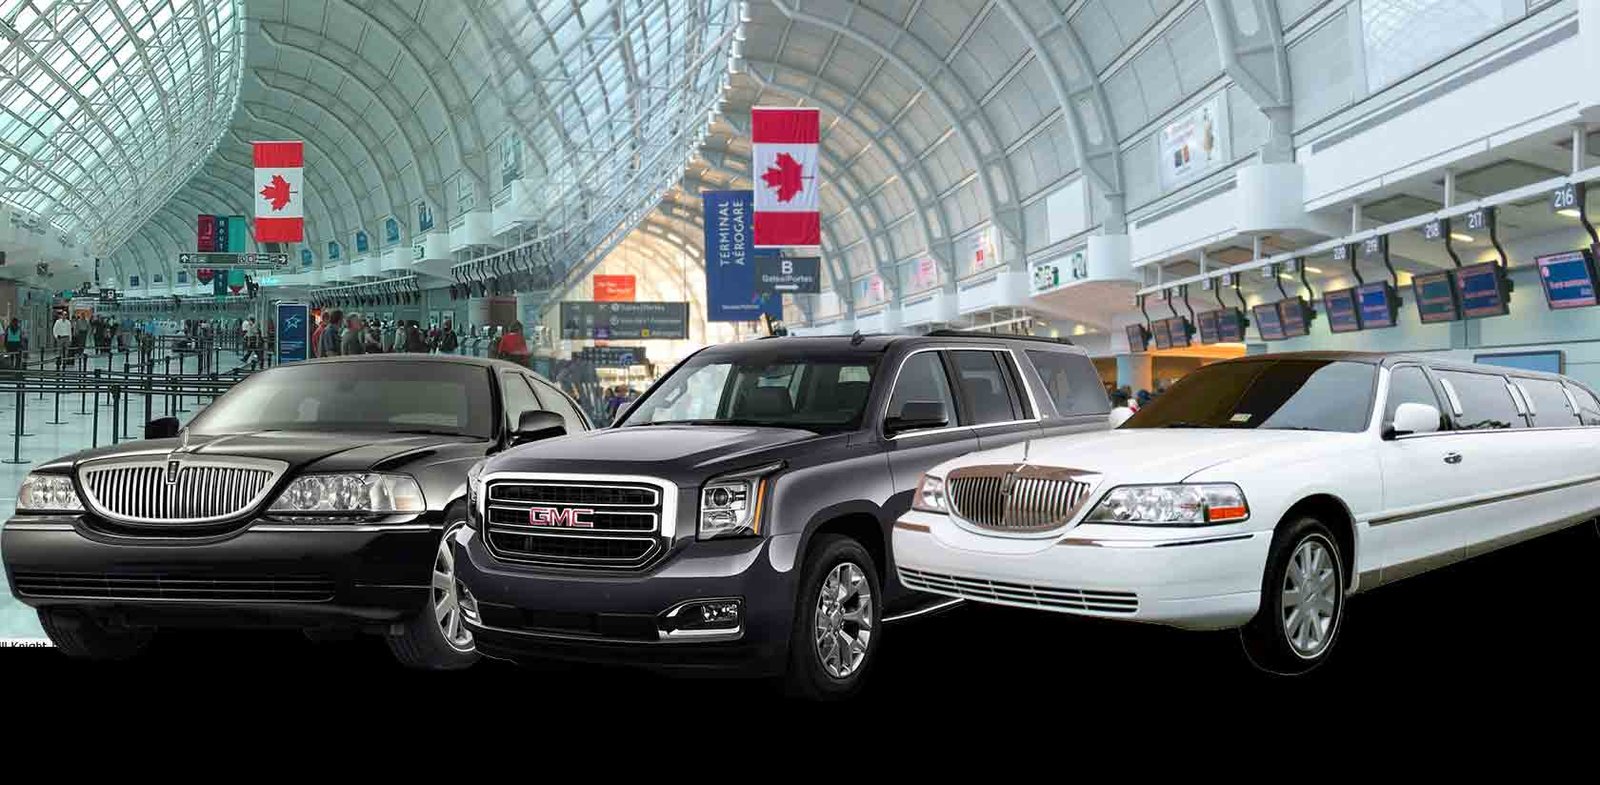 Here are five reasons to use a car service to get to Bradley airport